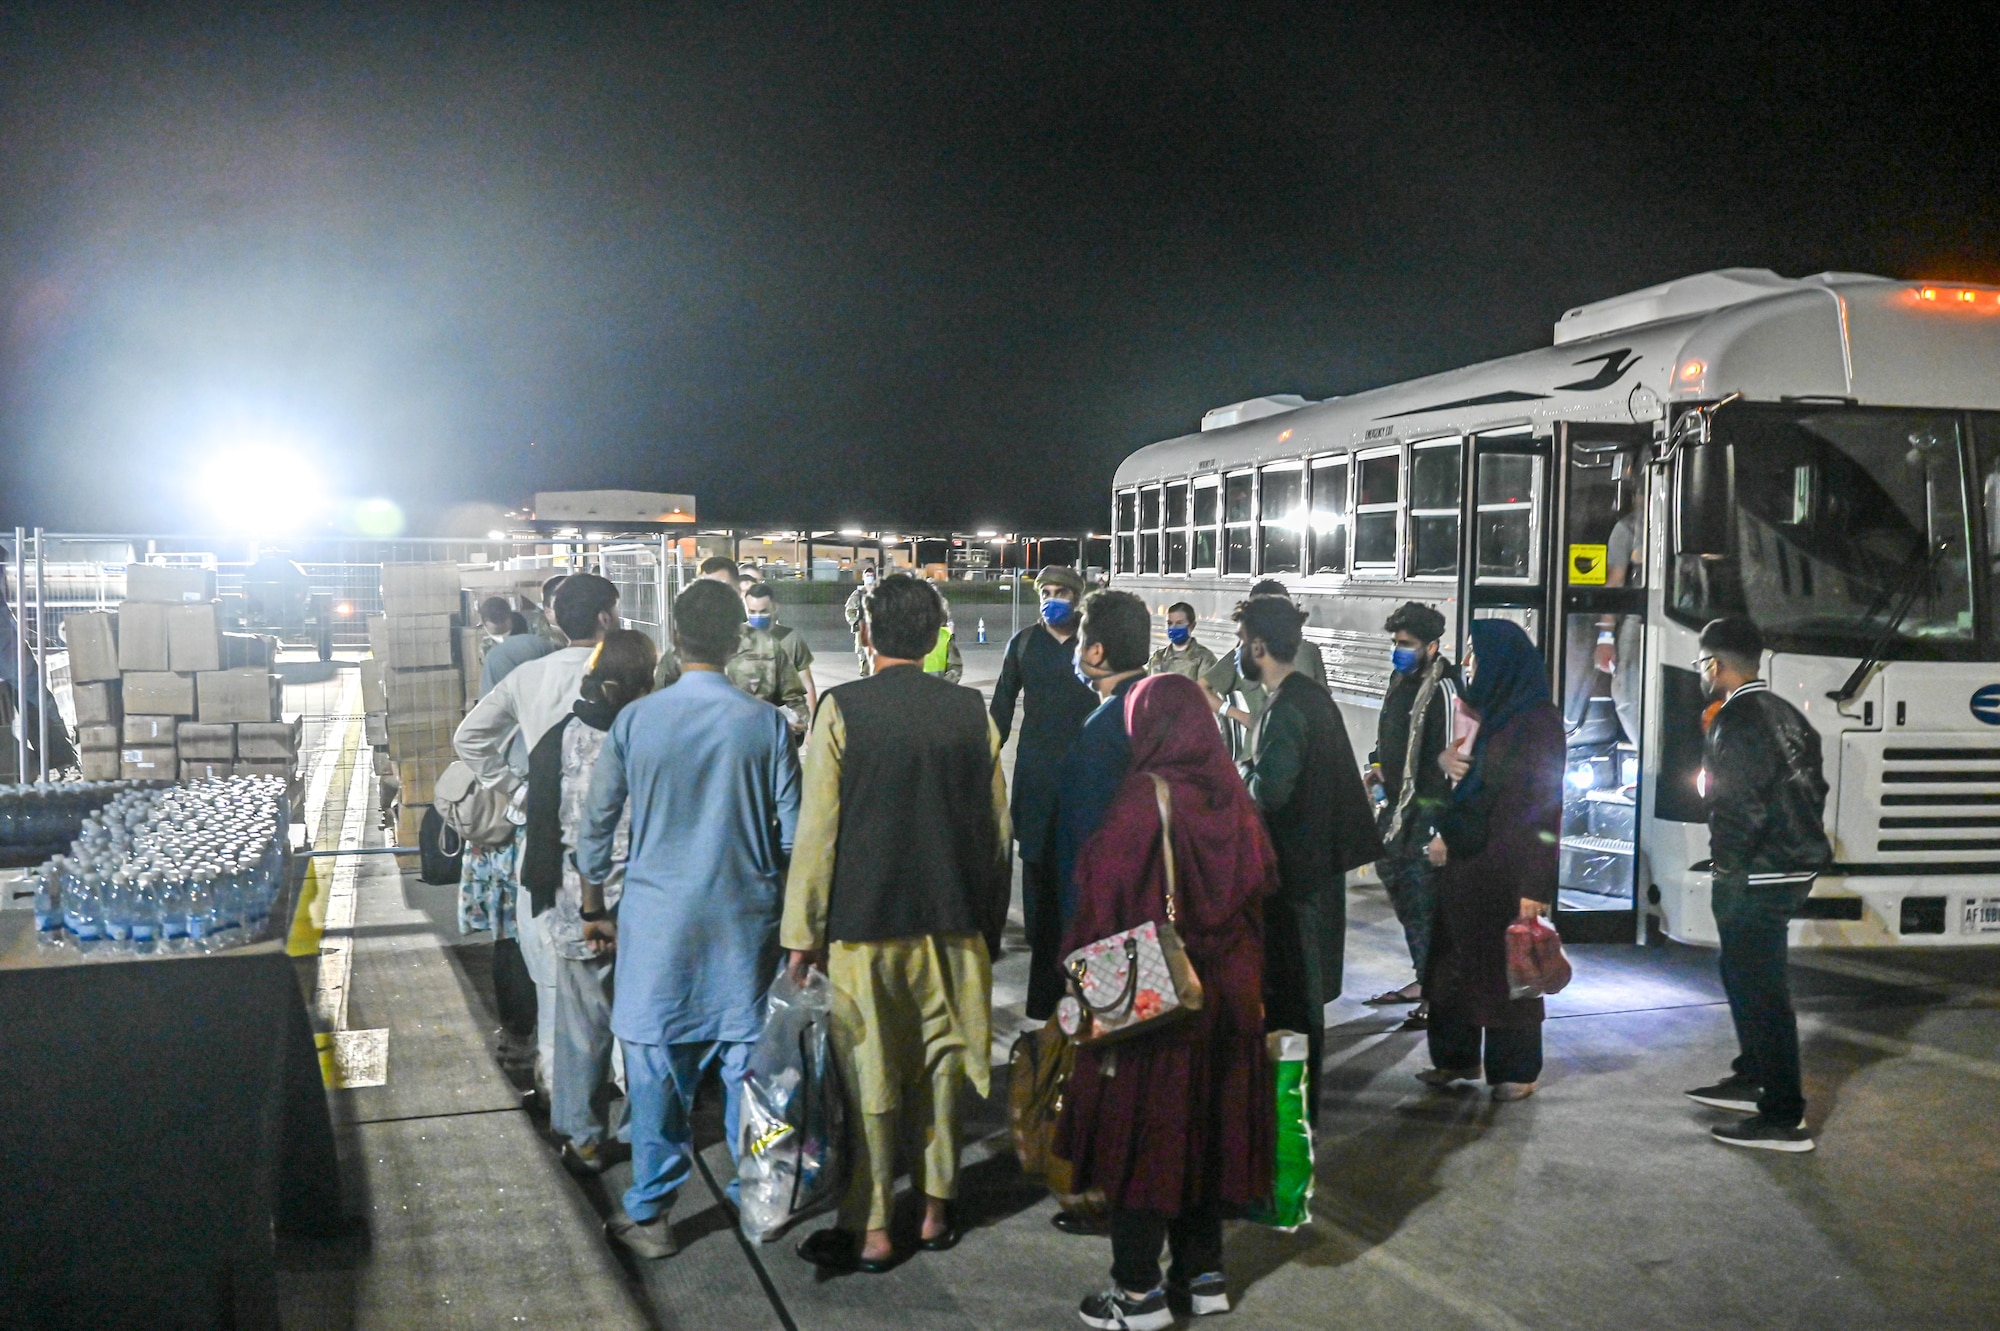 A group of Afghan evacuees depart a bus at Ramstein Air Base, Germany, Aug. 20, 2021. Ramstein AB is providing safe, temporary lodging for qualified evacuees from Afghanistan as part of Operation Allies Refuge during the next several weeks. Operation Allies Refuge is facilitating the quick, safe evacuation of U.S. citizens, Special Immigrant Visa applicants and other at-risk Afghans from Afghanistan. Qualified evacuees will receive support, such as temporary lodging, food, medical screening and treatment and more, while housed at Ramstein AB while preparing for onward movements to their final destinations.